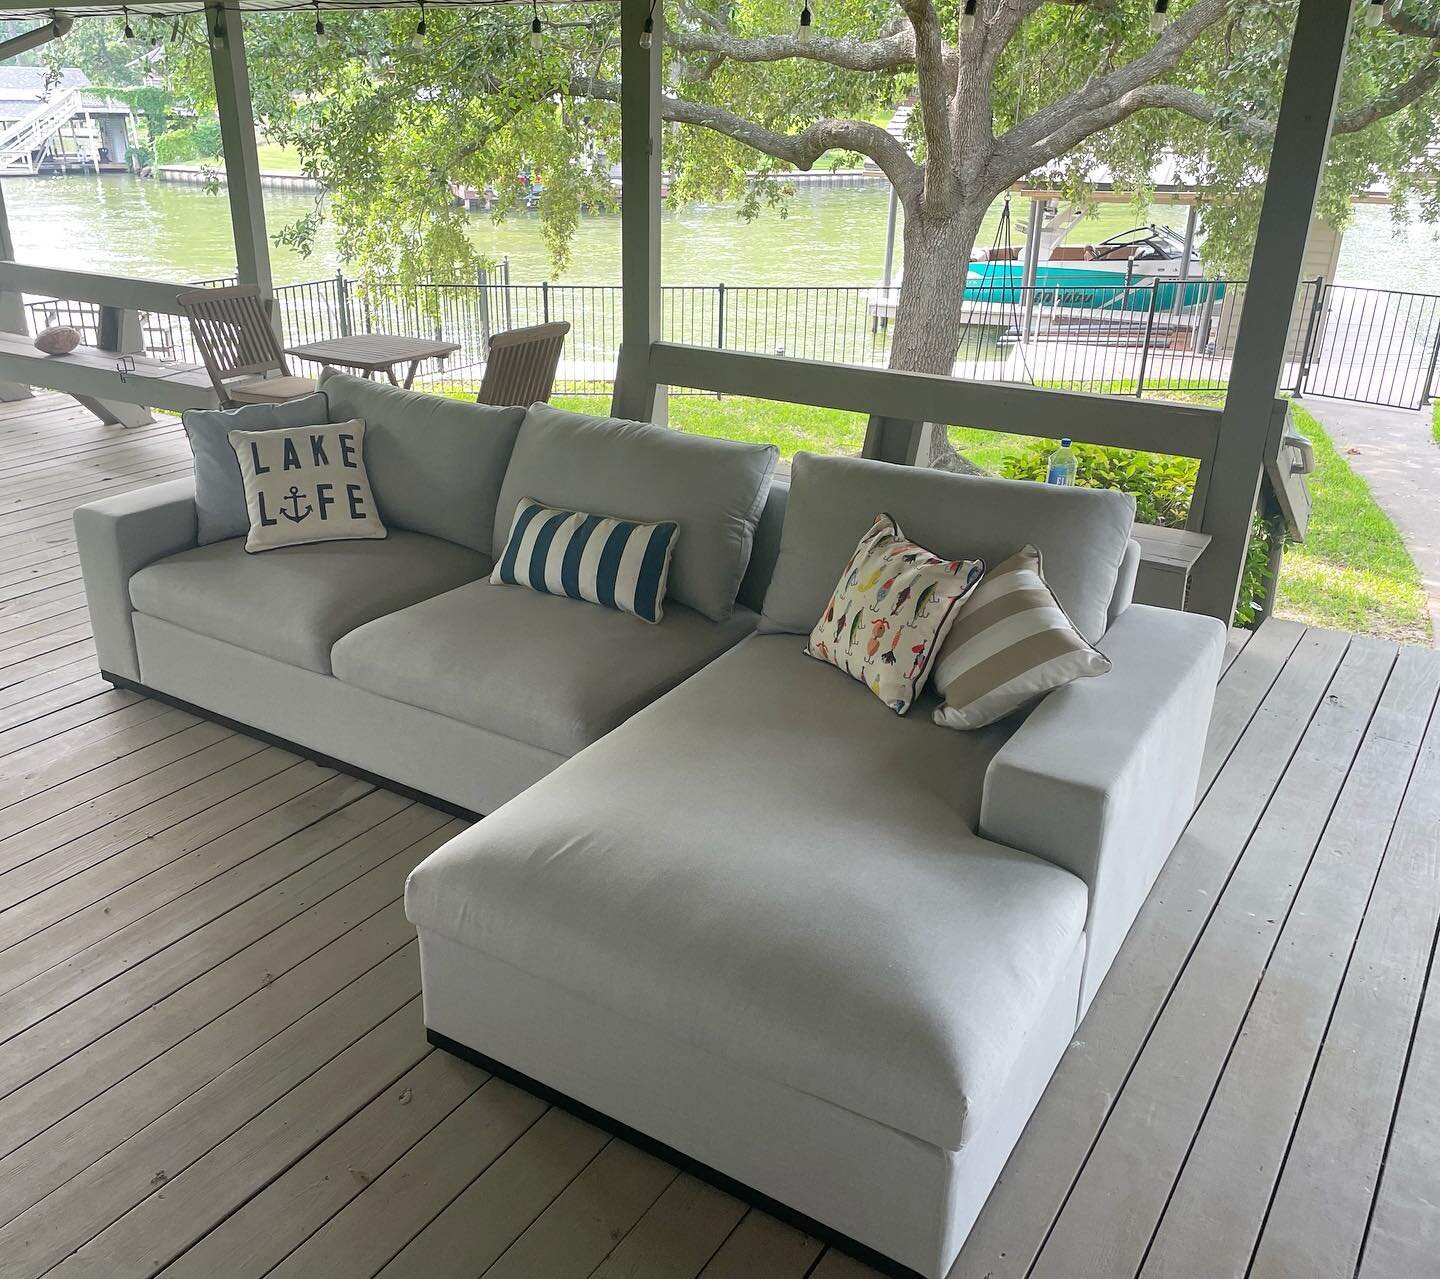 Our new Wade Outdoor Sectional looks right at home on this beautiful lakeside back porch. So comfy you won&rsquo;t believe it&rsquo;s meant for outdoor use and so durable, the weather and elements won&rsquo;t touch it. Click the link in our profile t